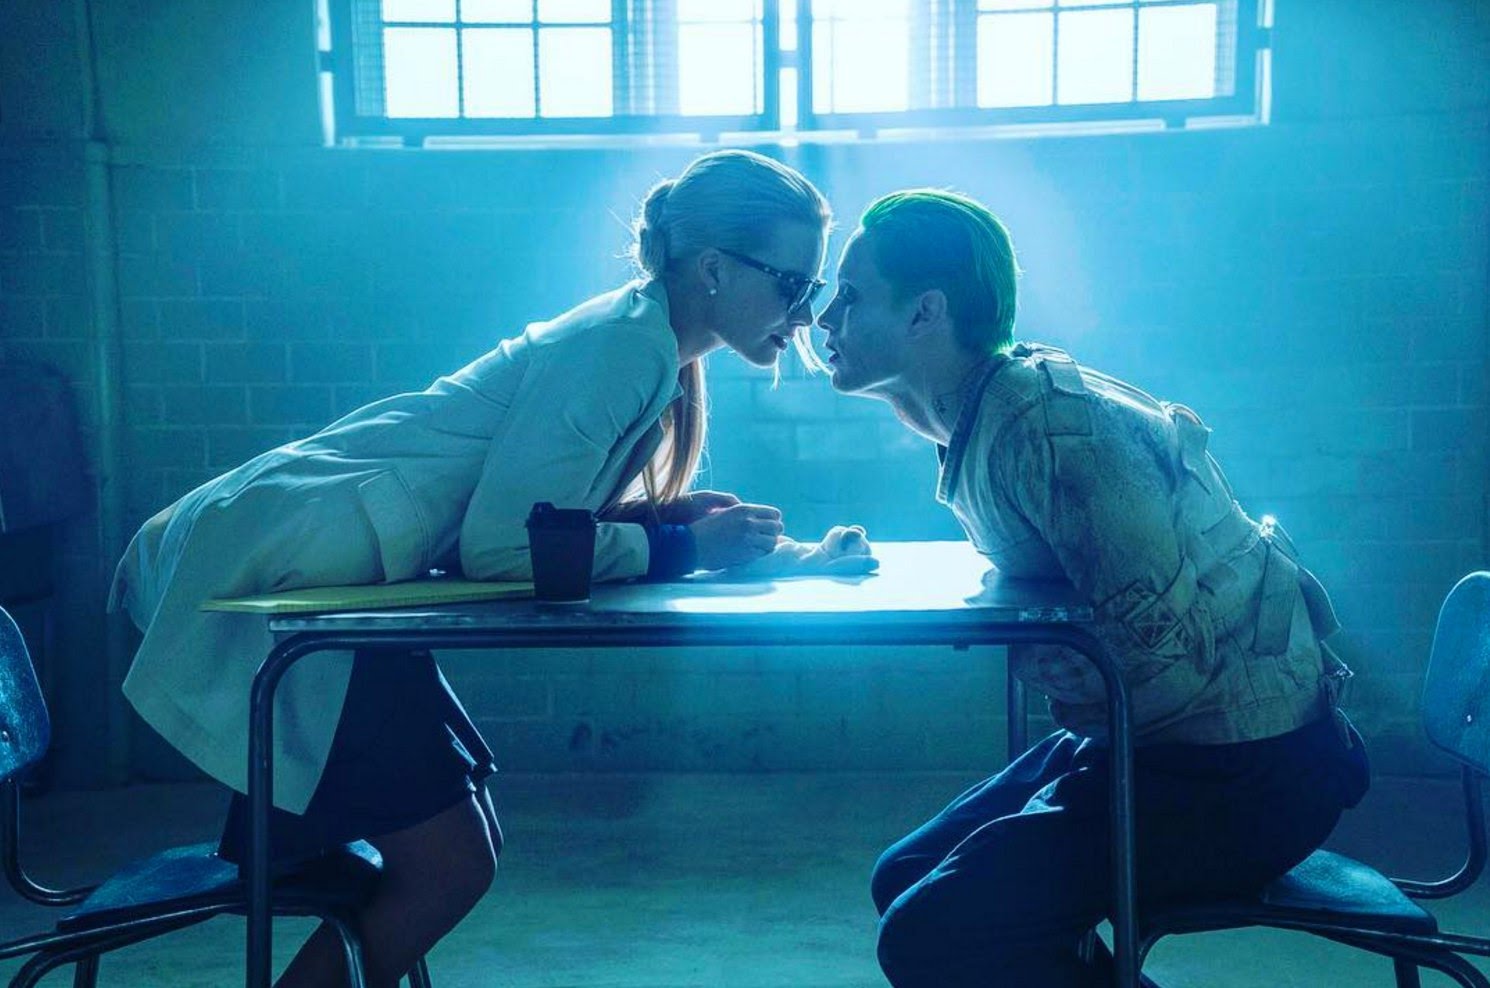 A new take on a twisted romance? Harley quinn and the joker get their own movie